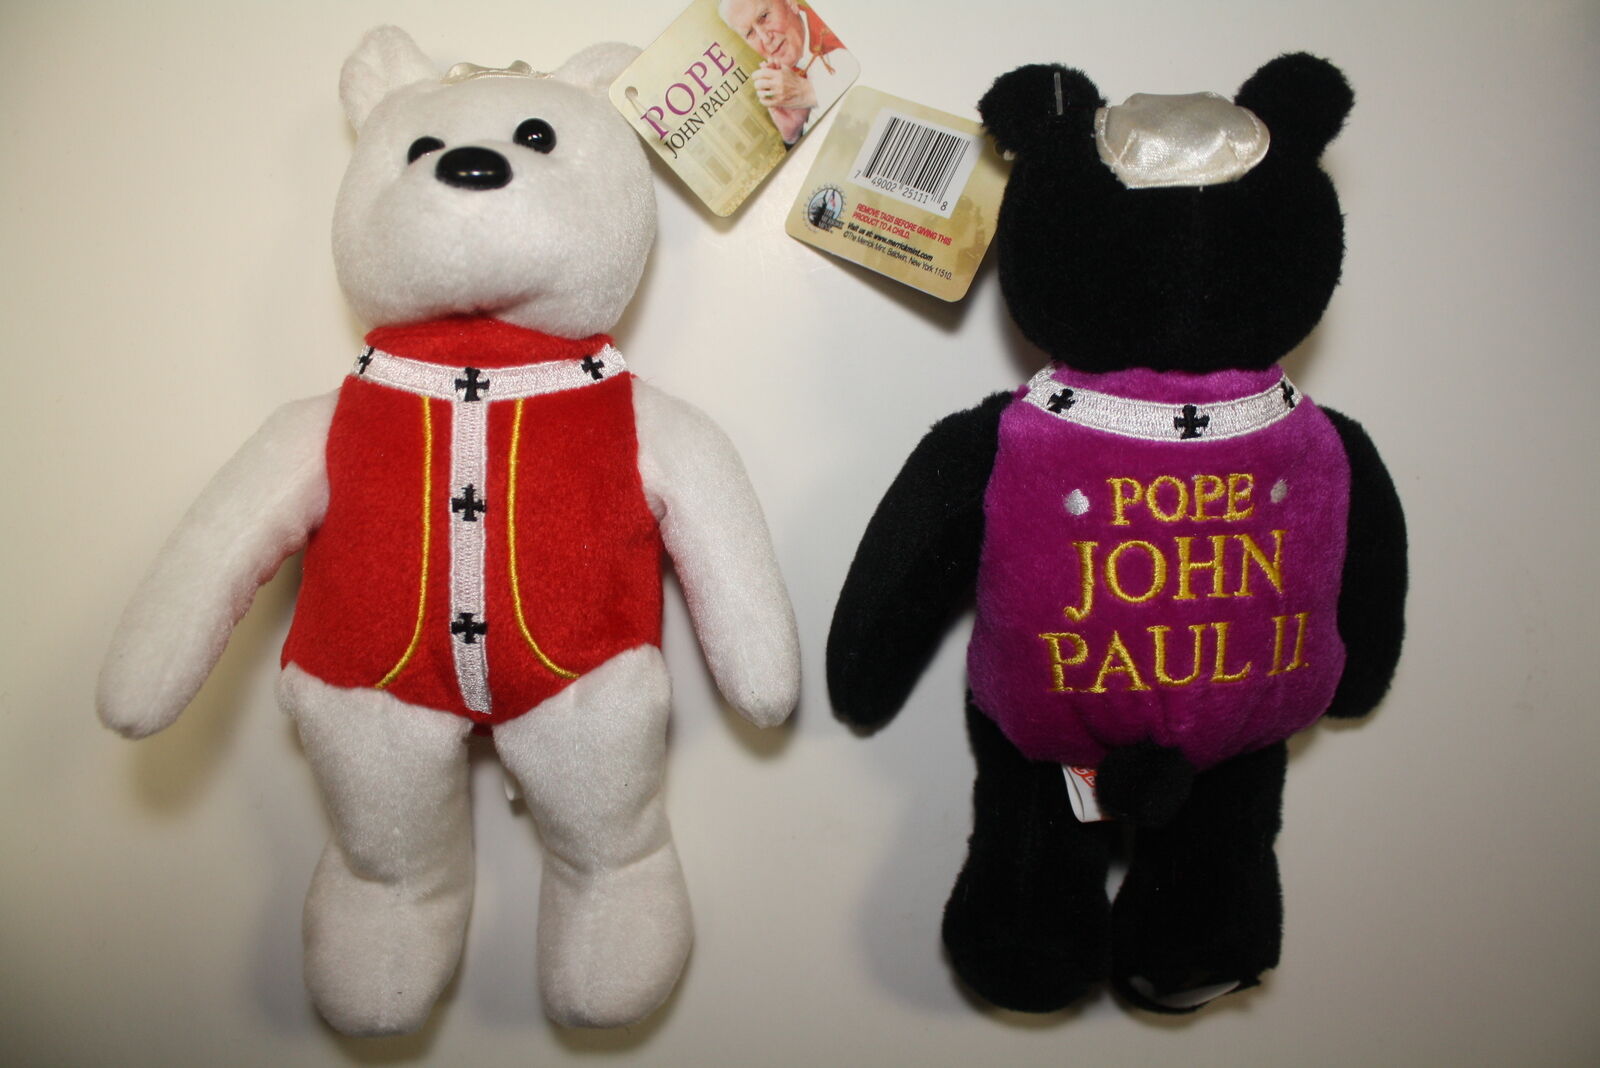 Pair of POPE JOHN PAUL II PLUSH BEARS with Canonization 24K Gold State Quarters